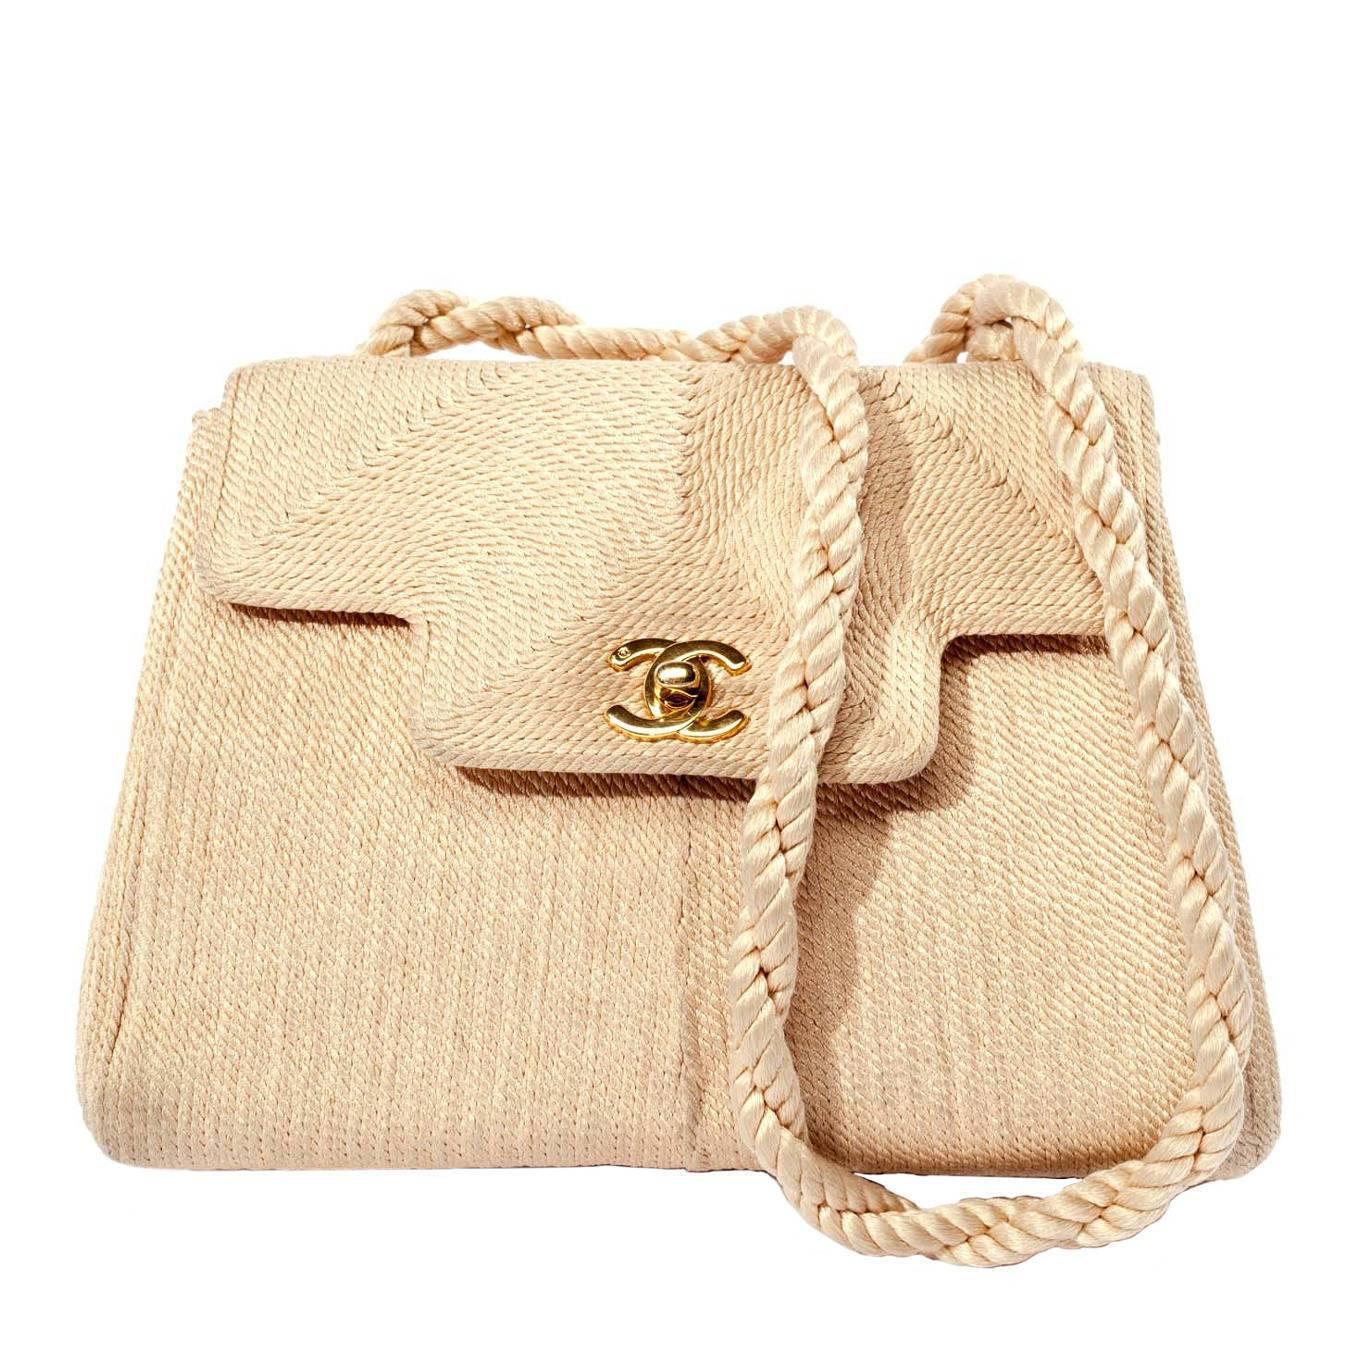 Chanel Vintage beige rope purse with gold logo double CC closure